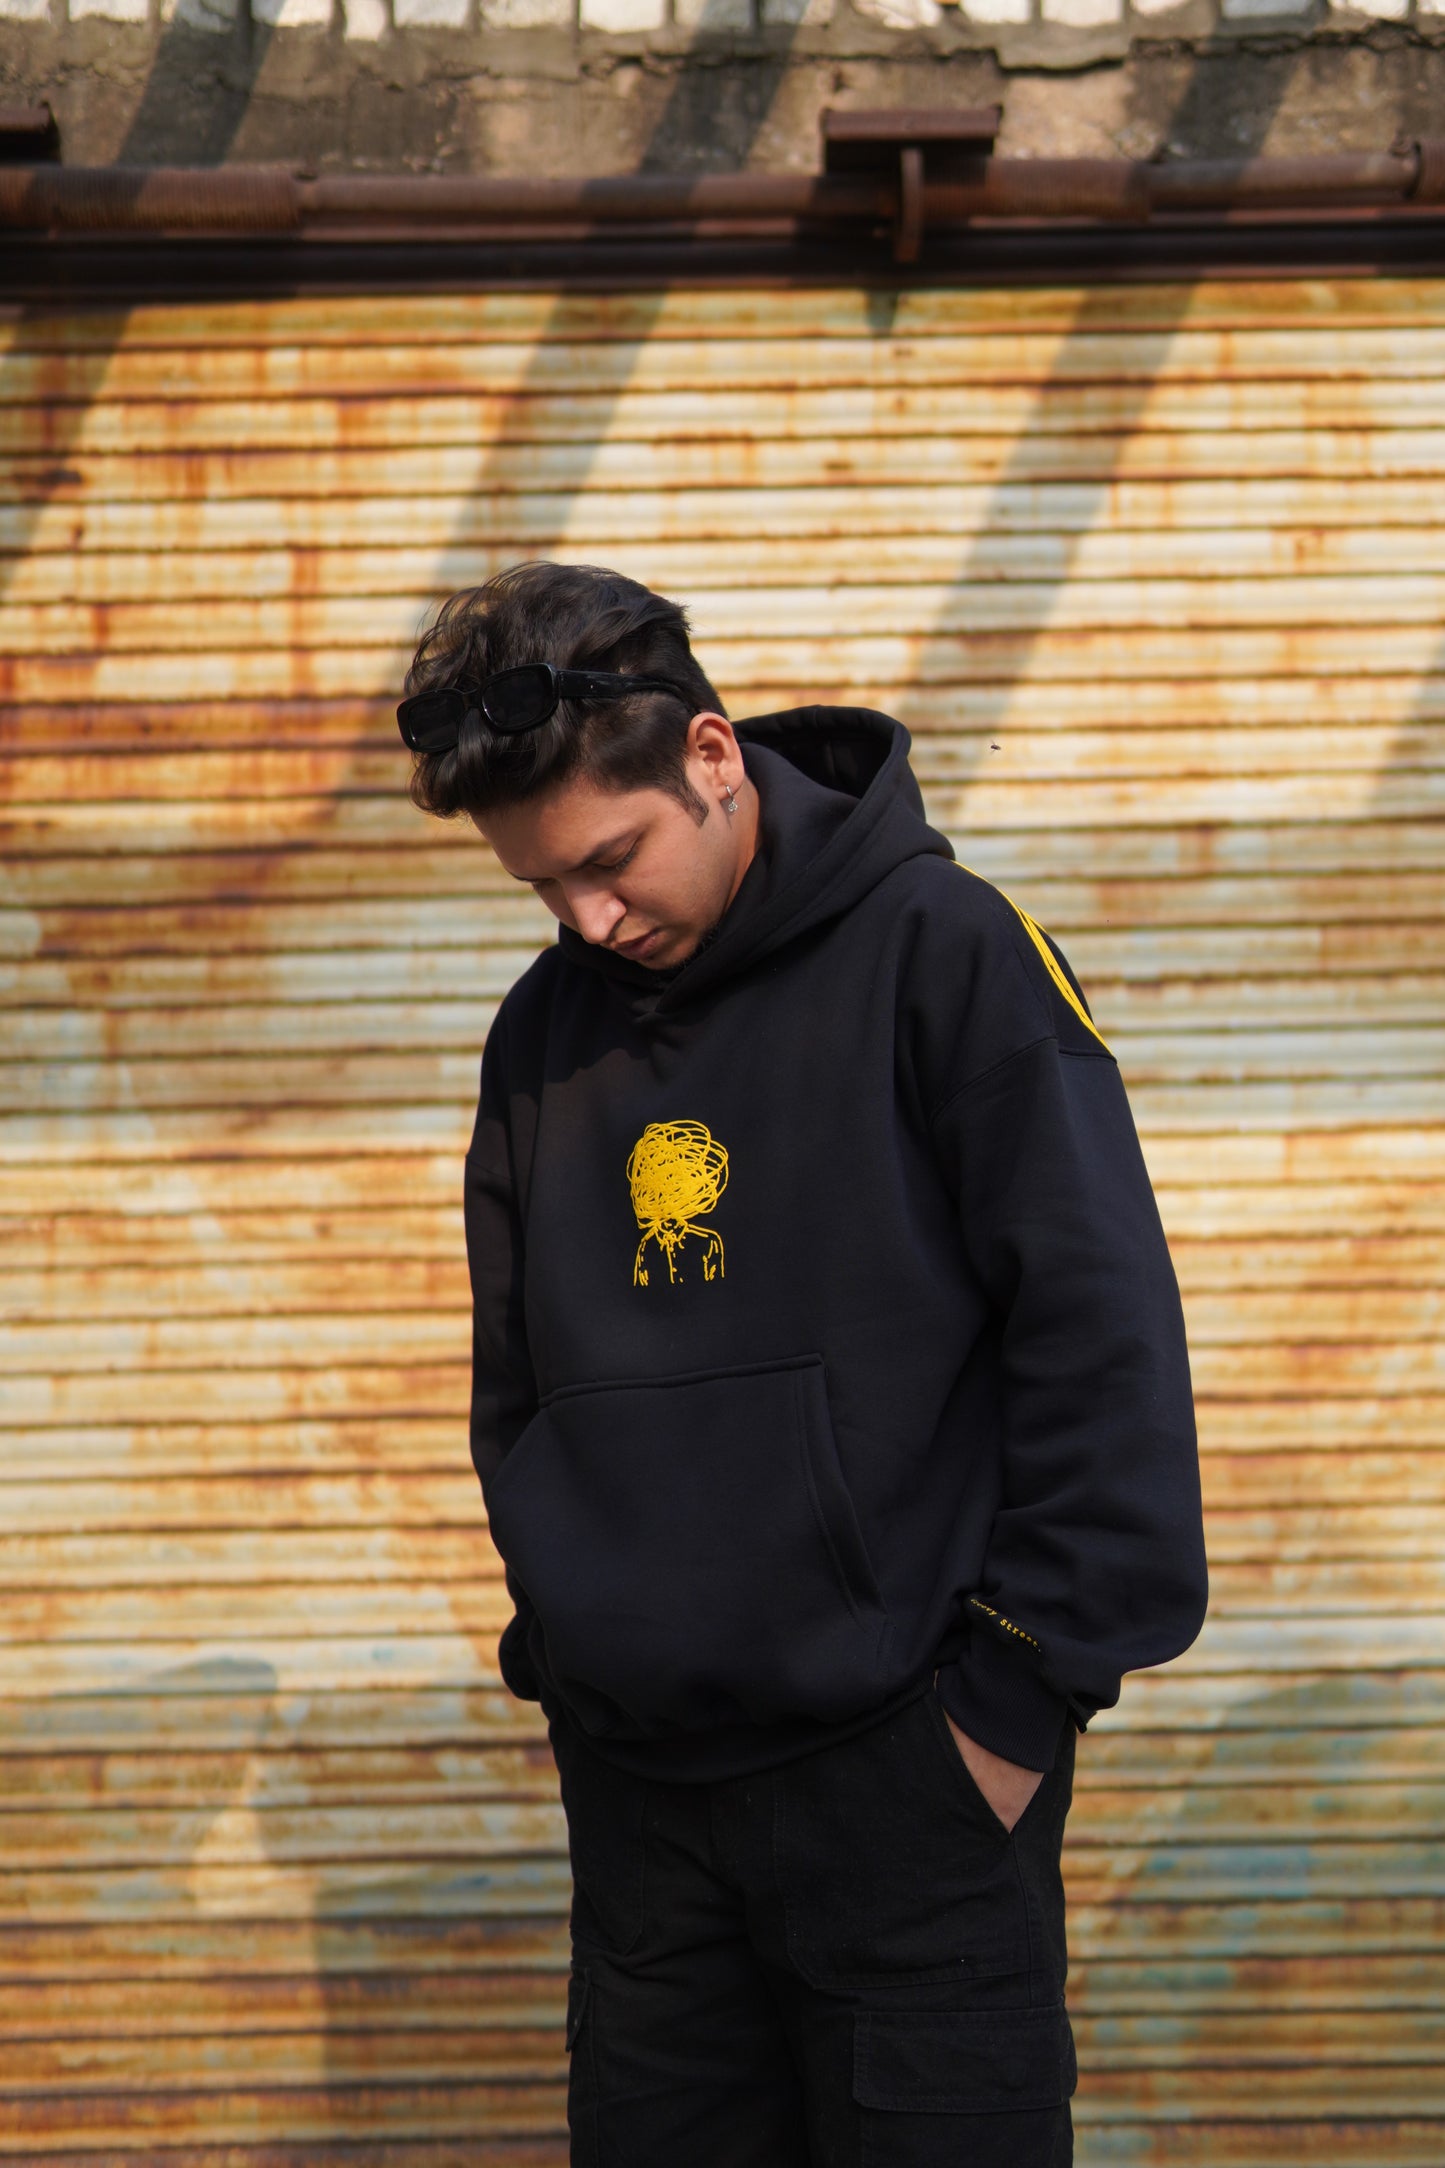 Chaotic Black unisex Over-sized Hoodie